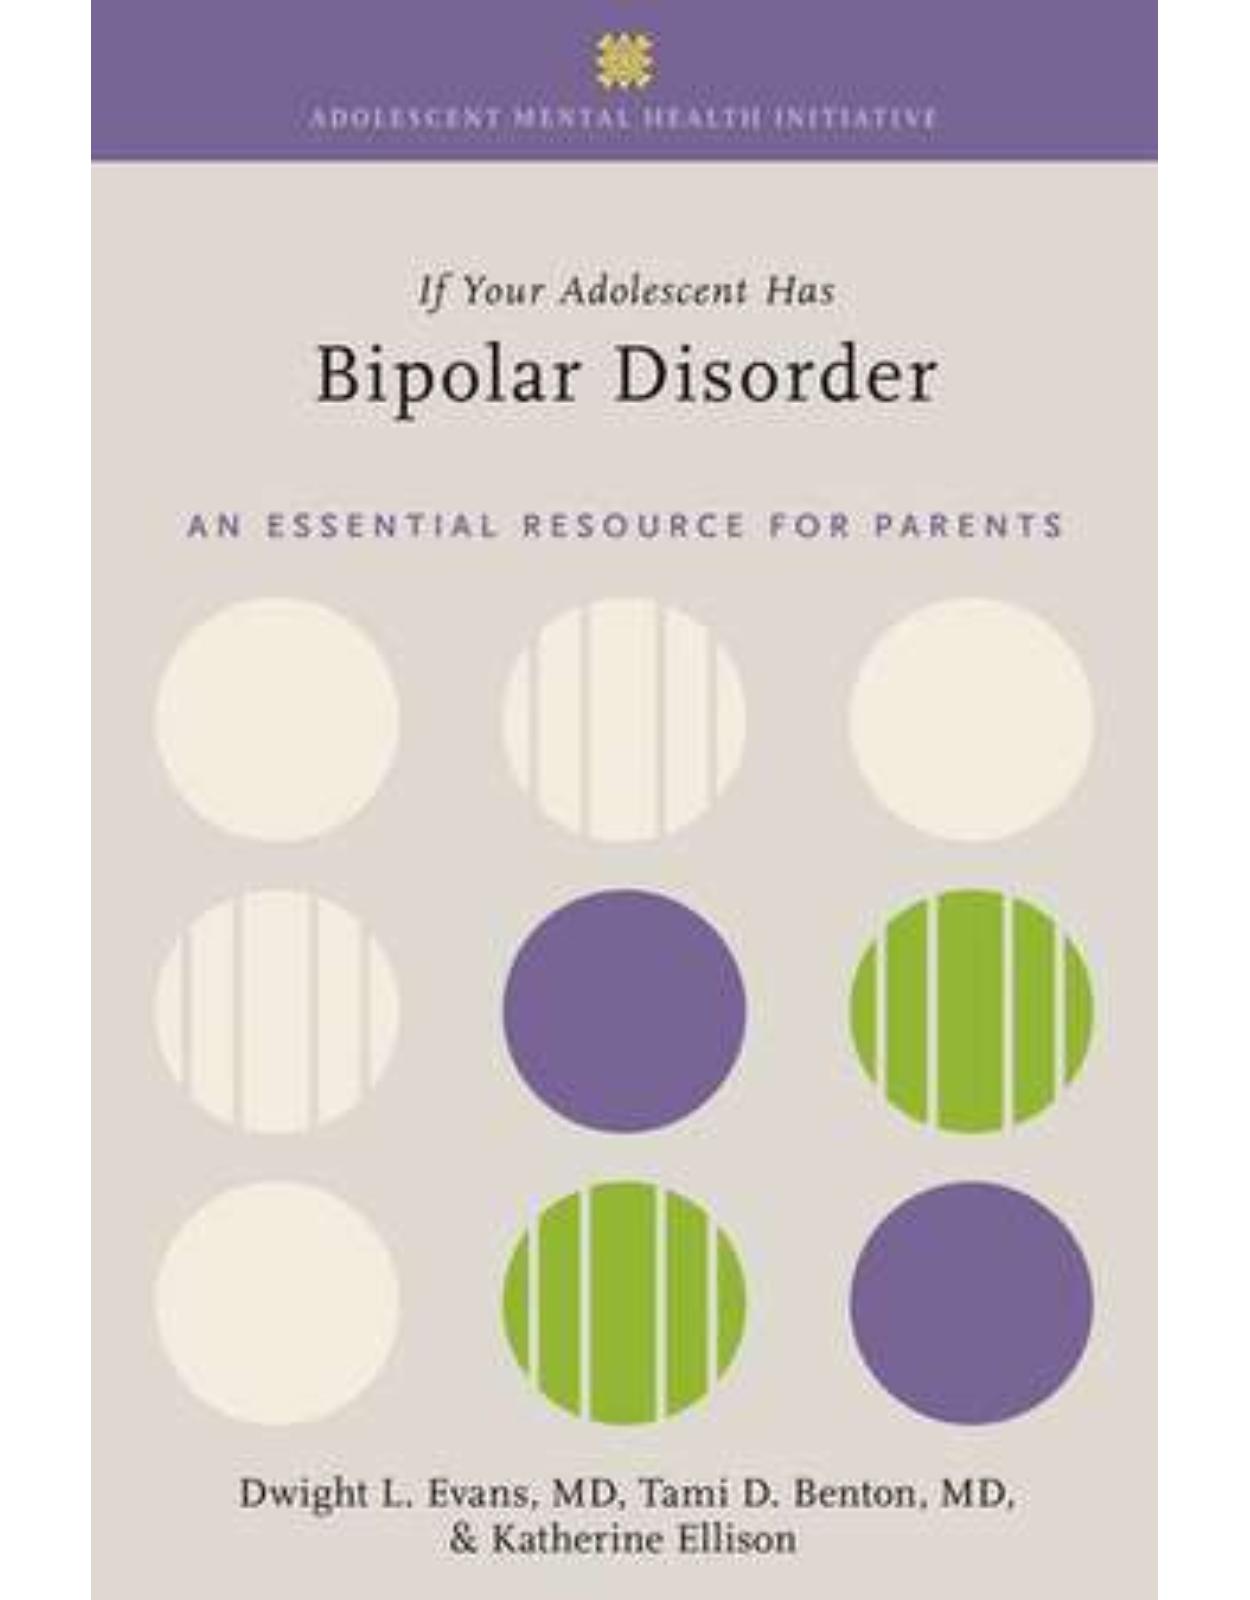 If Your Adolescent Has Bipolar Disorder